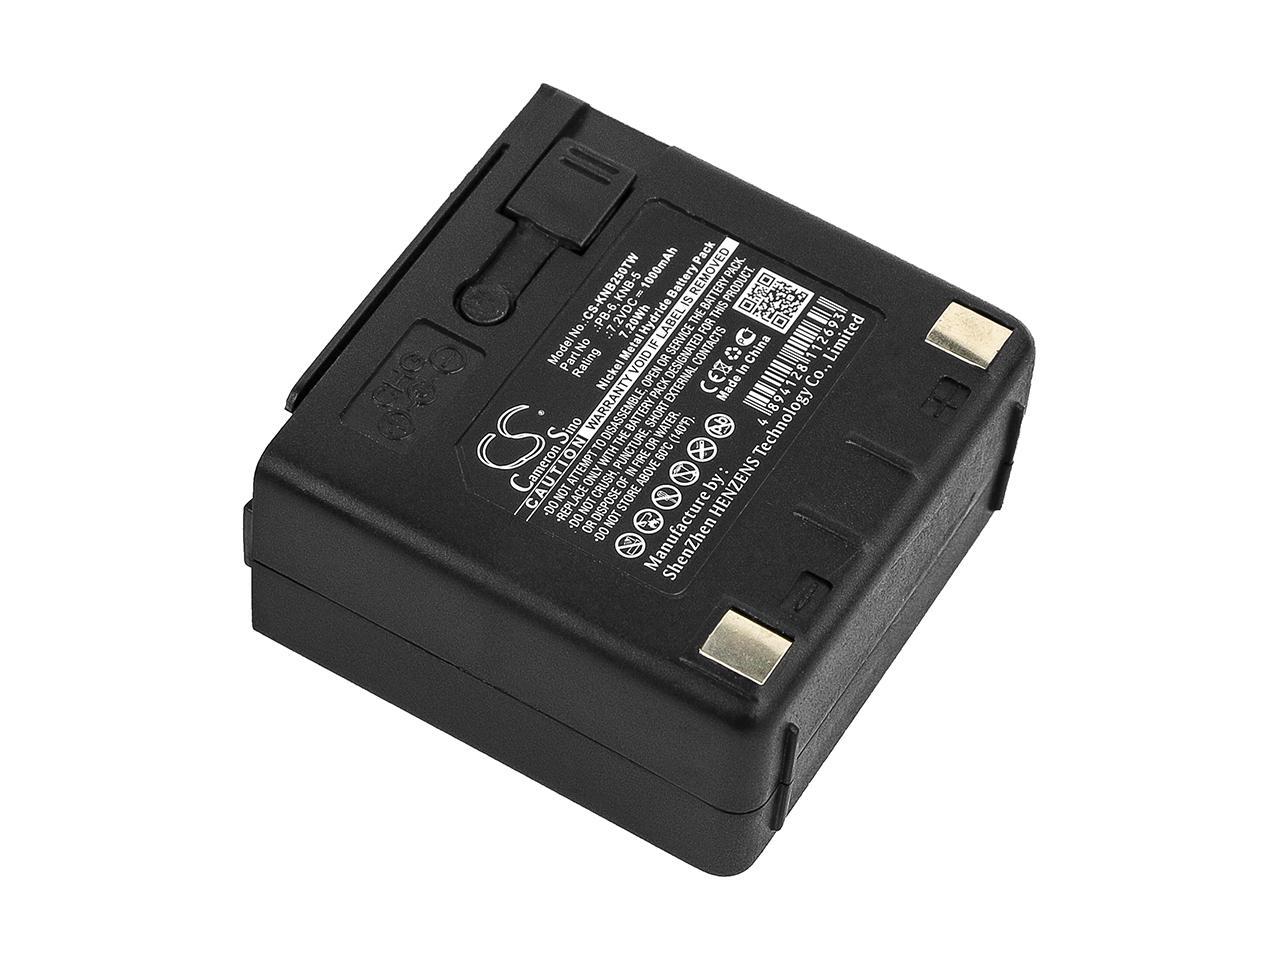 1000mAh Battery Replacement for Kenwood TH-46 TH-75A TH77AT TH-45A TH-46A TH-46E TK340 TK240 TH-77E TH-77 TH-25E TH75AT TH-25A PB-9 PB-7 PB-10 B-7 KNB-5 KNB-6A KNB-10 PB-8 KNB-5A PB-6 KNB-6 7.2V